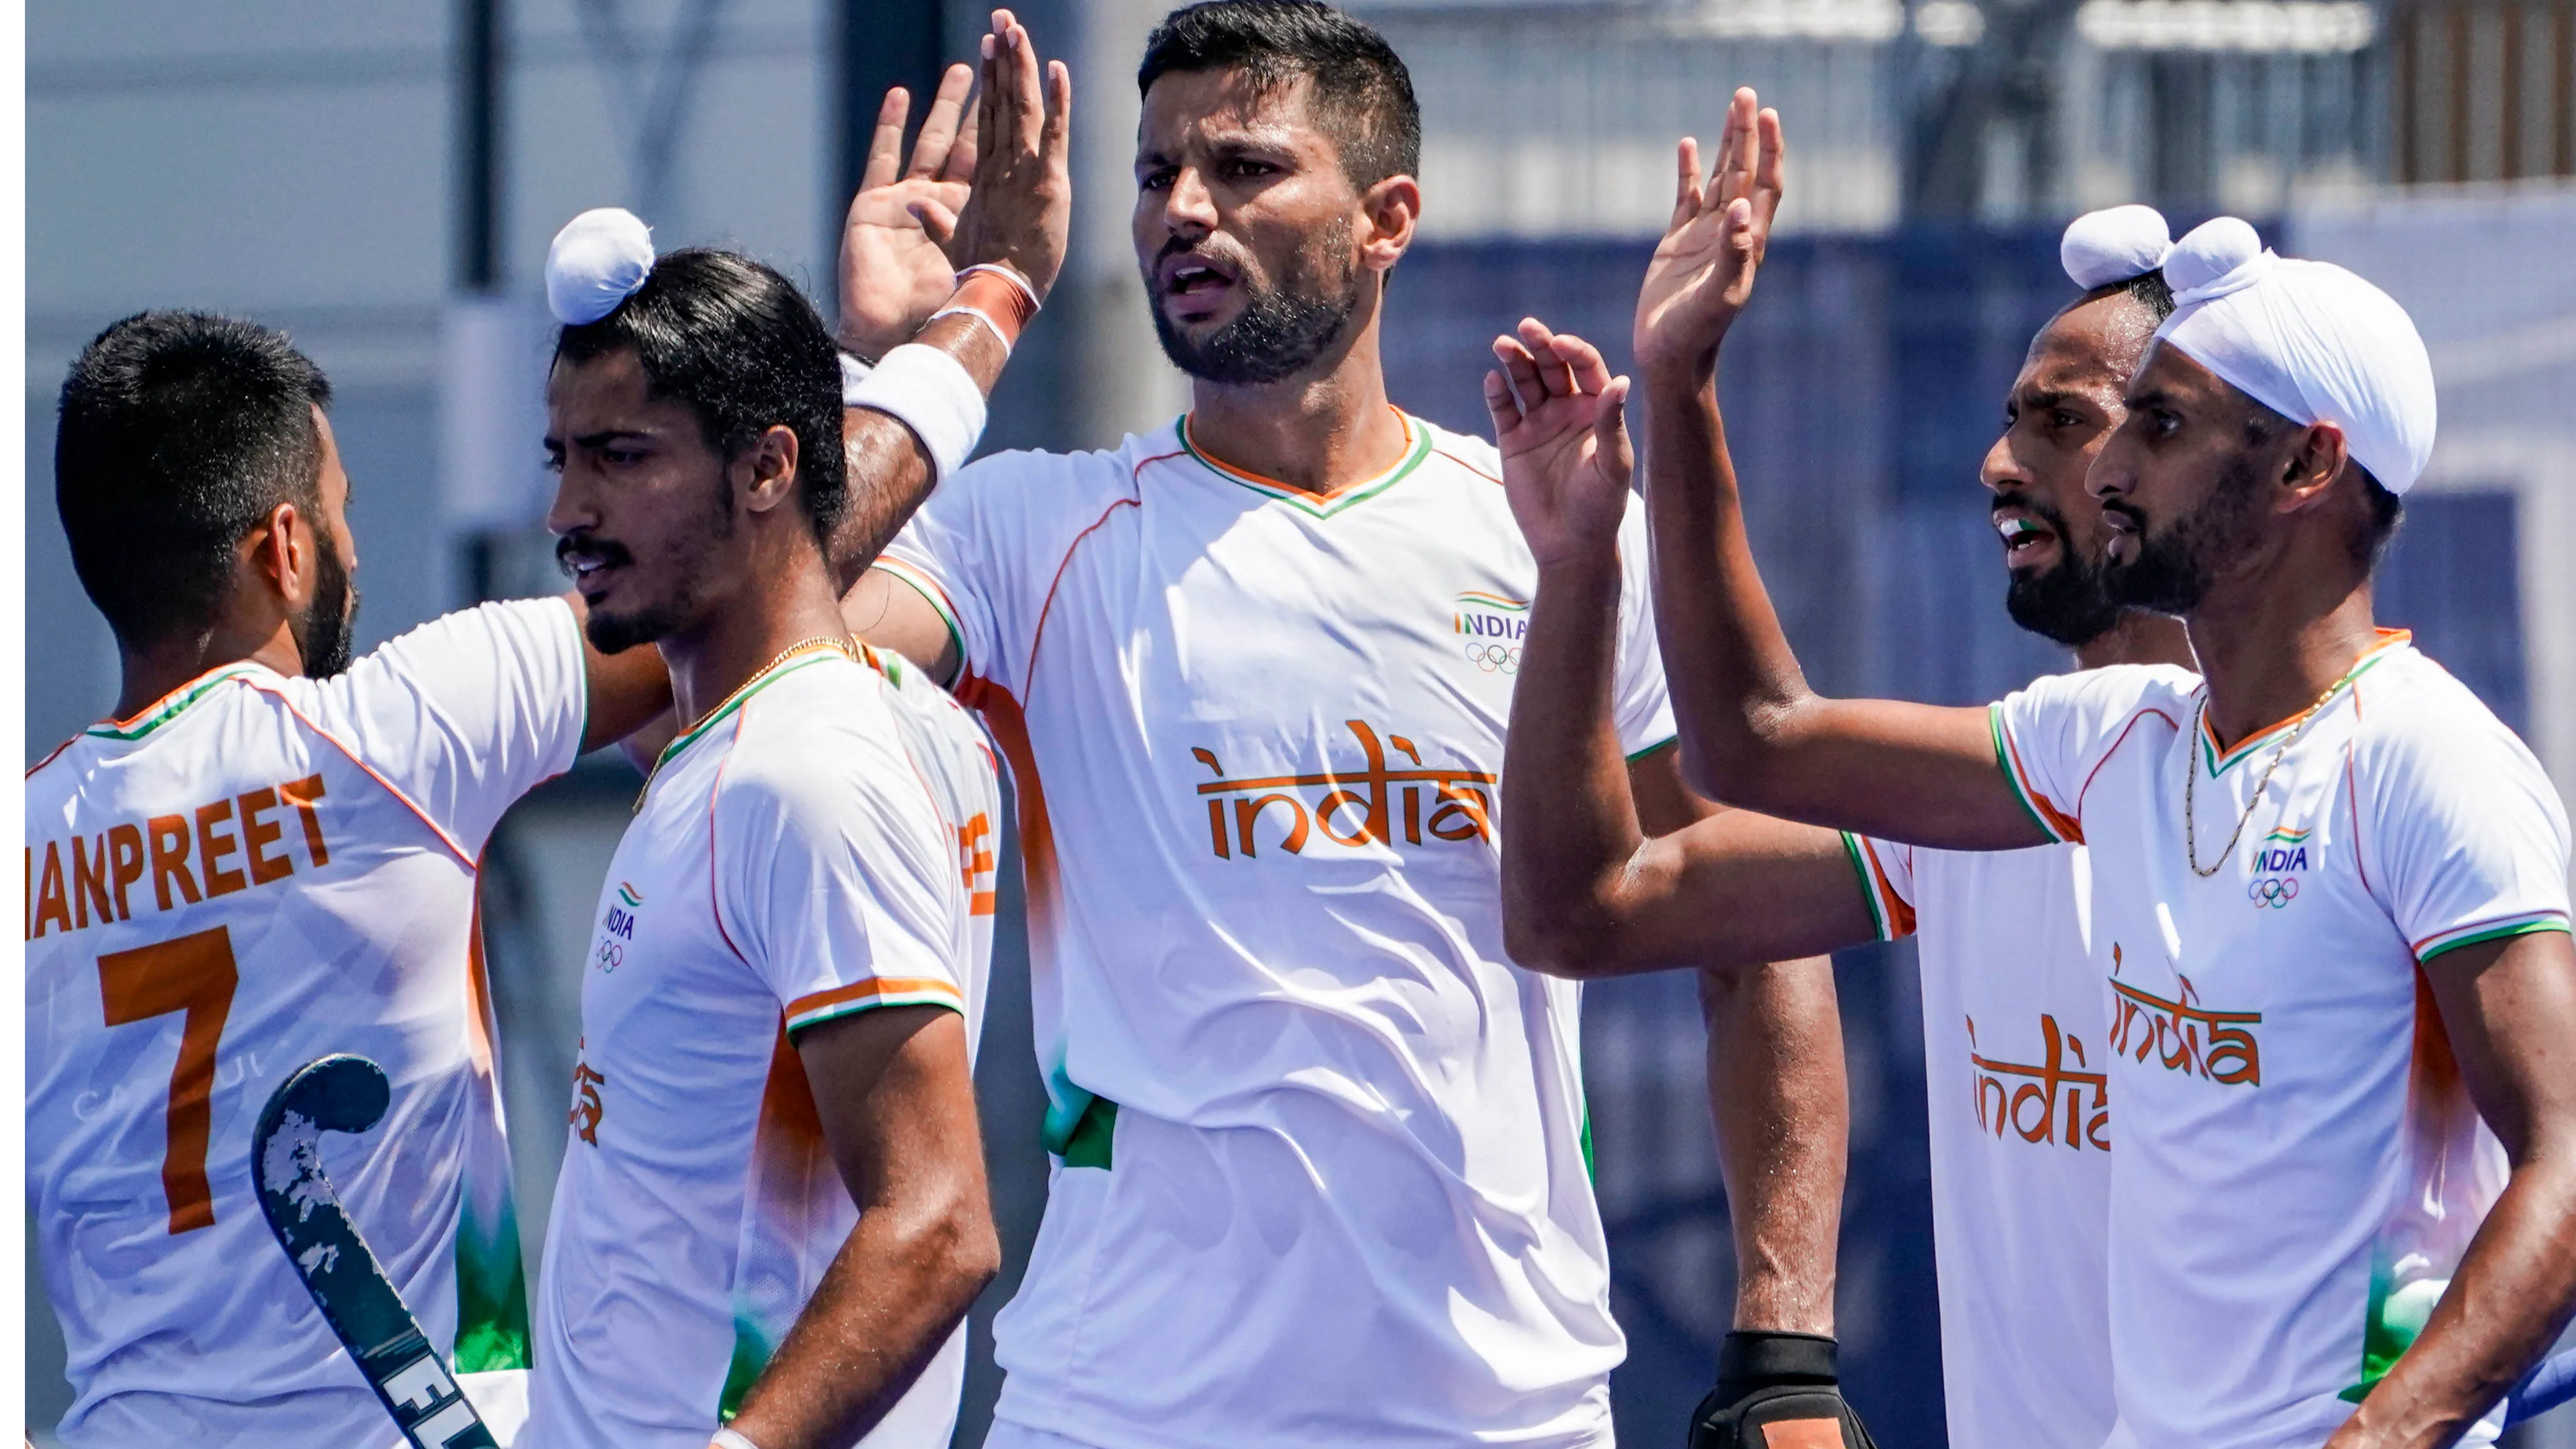 Tokyo Olympics: India beat Spain 3-0 in men’s hockey Pool A match